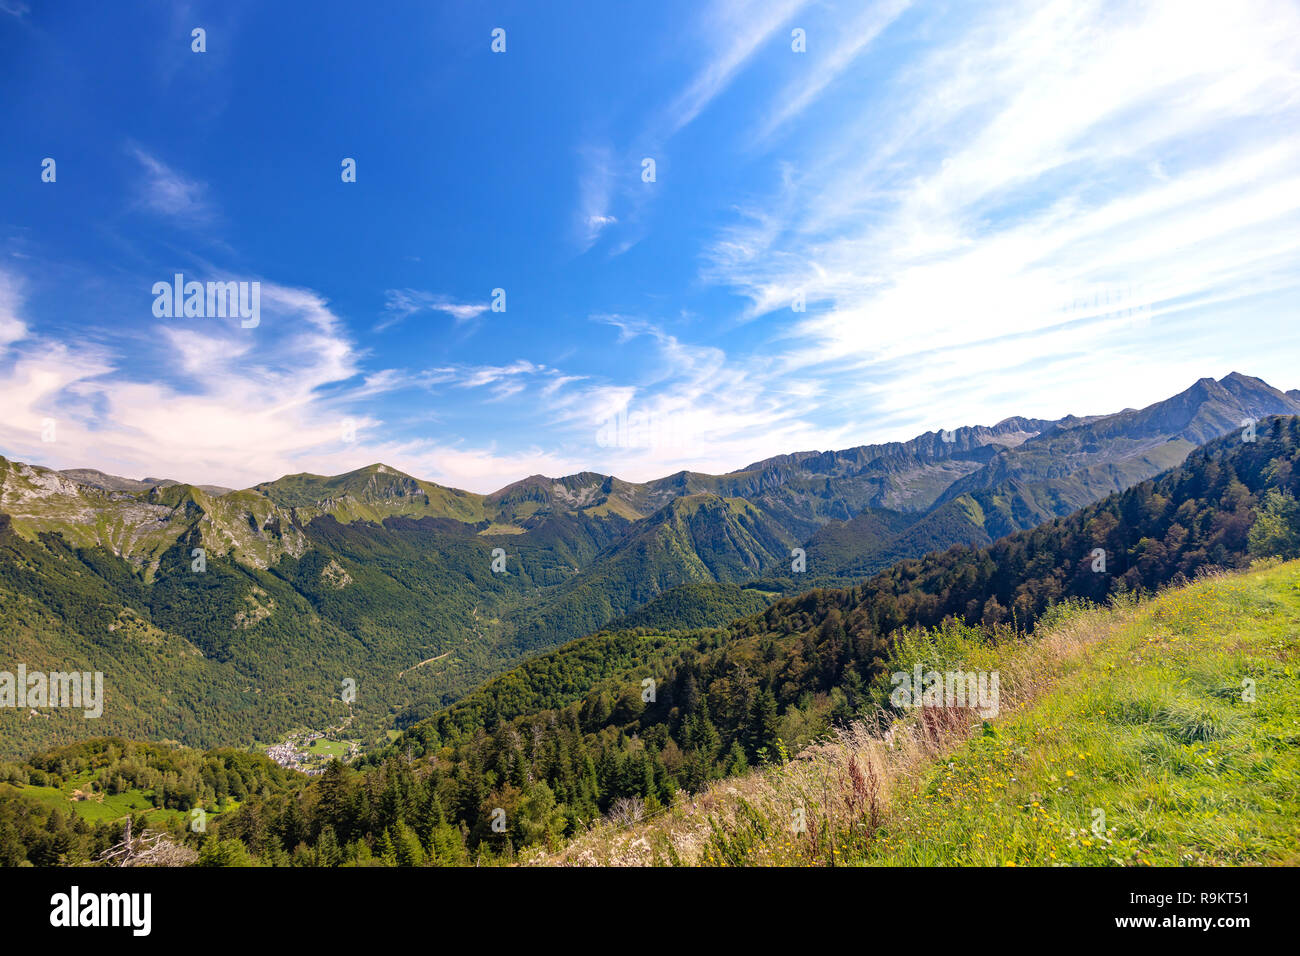 View of Aulus-les-Bains village from Guzet-neige ski resort in summer.  Couserans-Pyrenees, Ustou Valley, Ariège, Occitanie, France Stock Photo -  Alamy